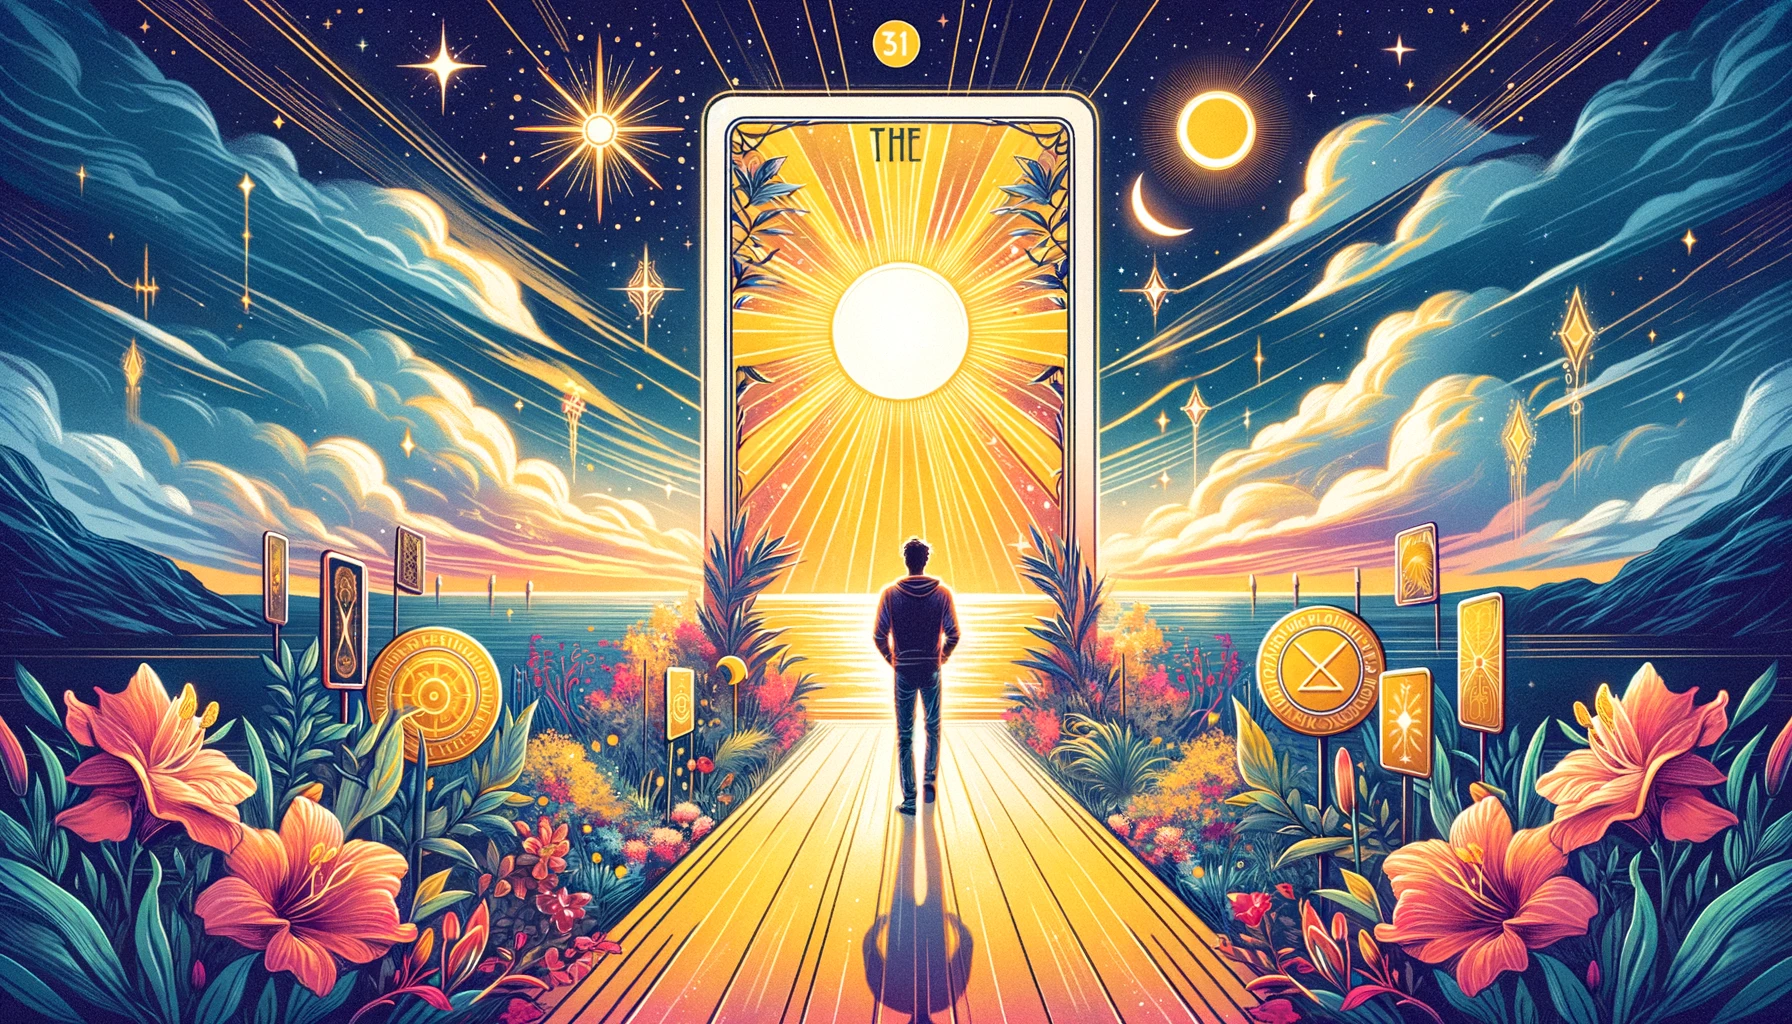 "Depiction capturing the positive energy, certainty, and affirmation associated with 'The Sun' Tarot card in tarot readings. Sets a bright and encouraging tone for discussing the card as a clear 'yes' in yes or no tarot readings, emphasizing its link to positive outcomes and encouragement to pursue goals."